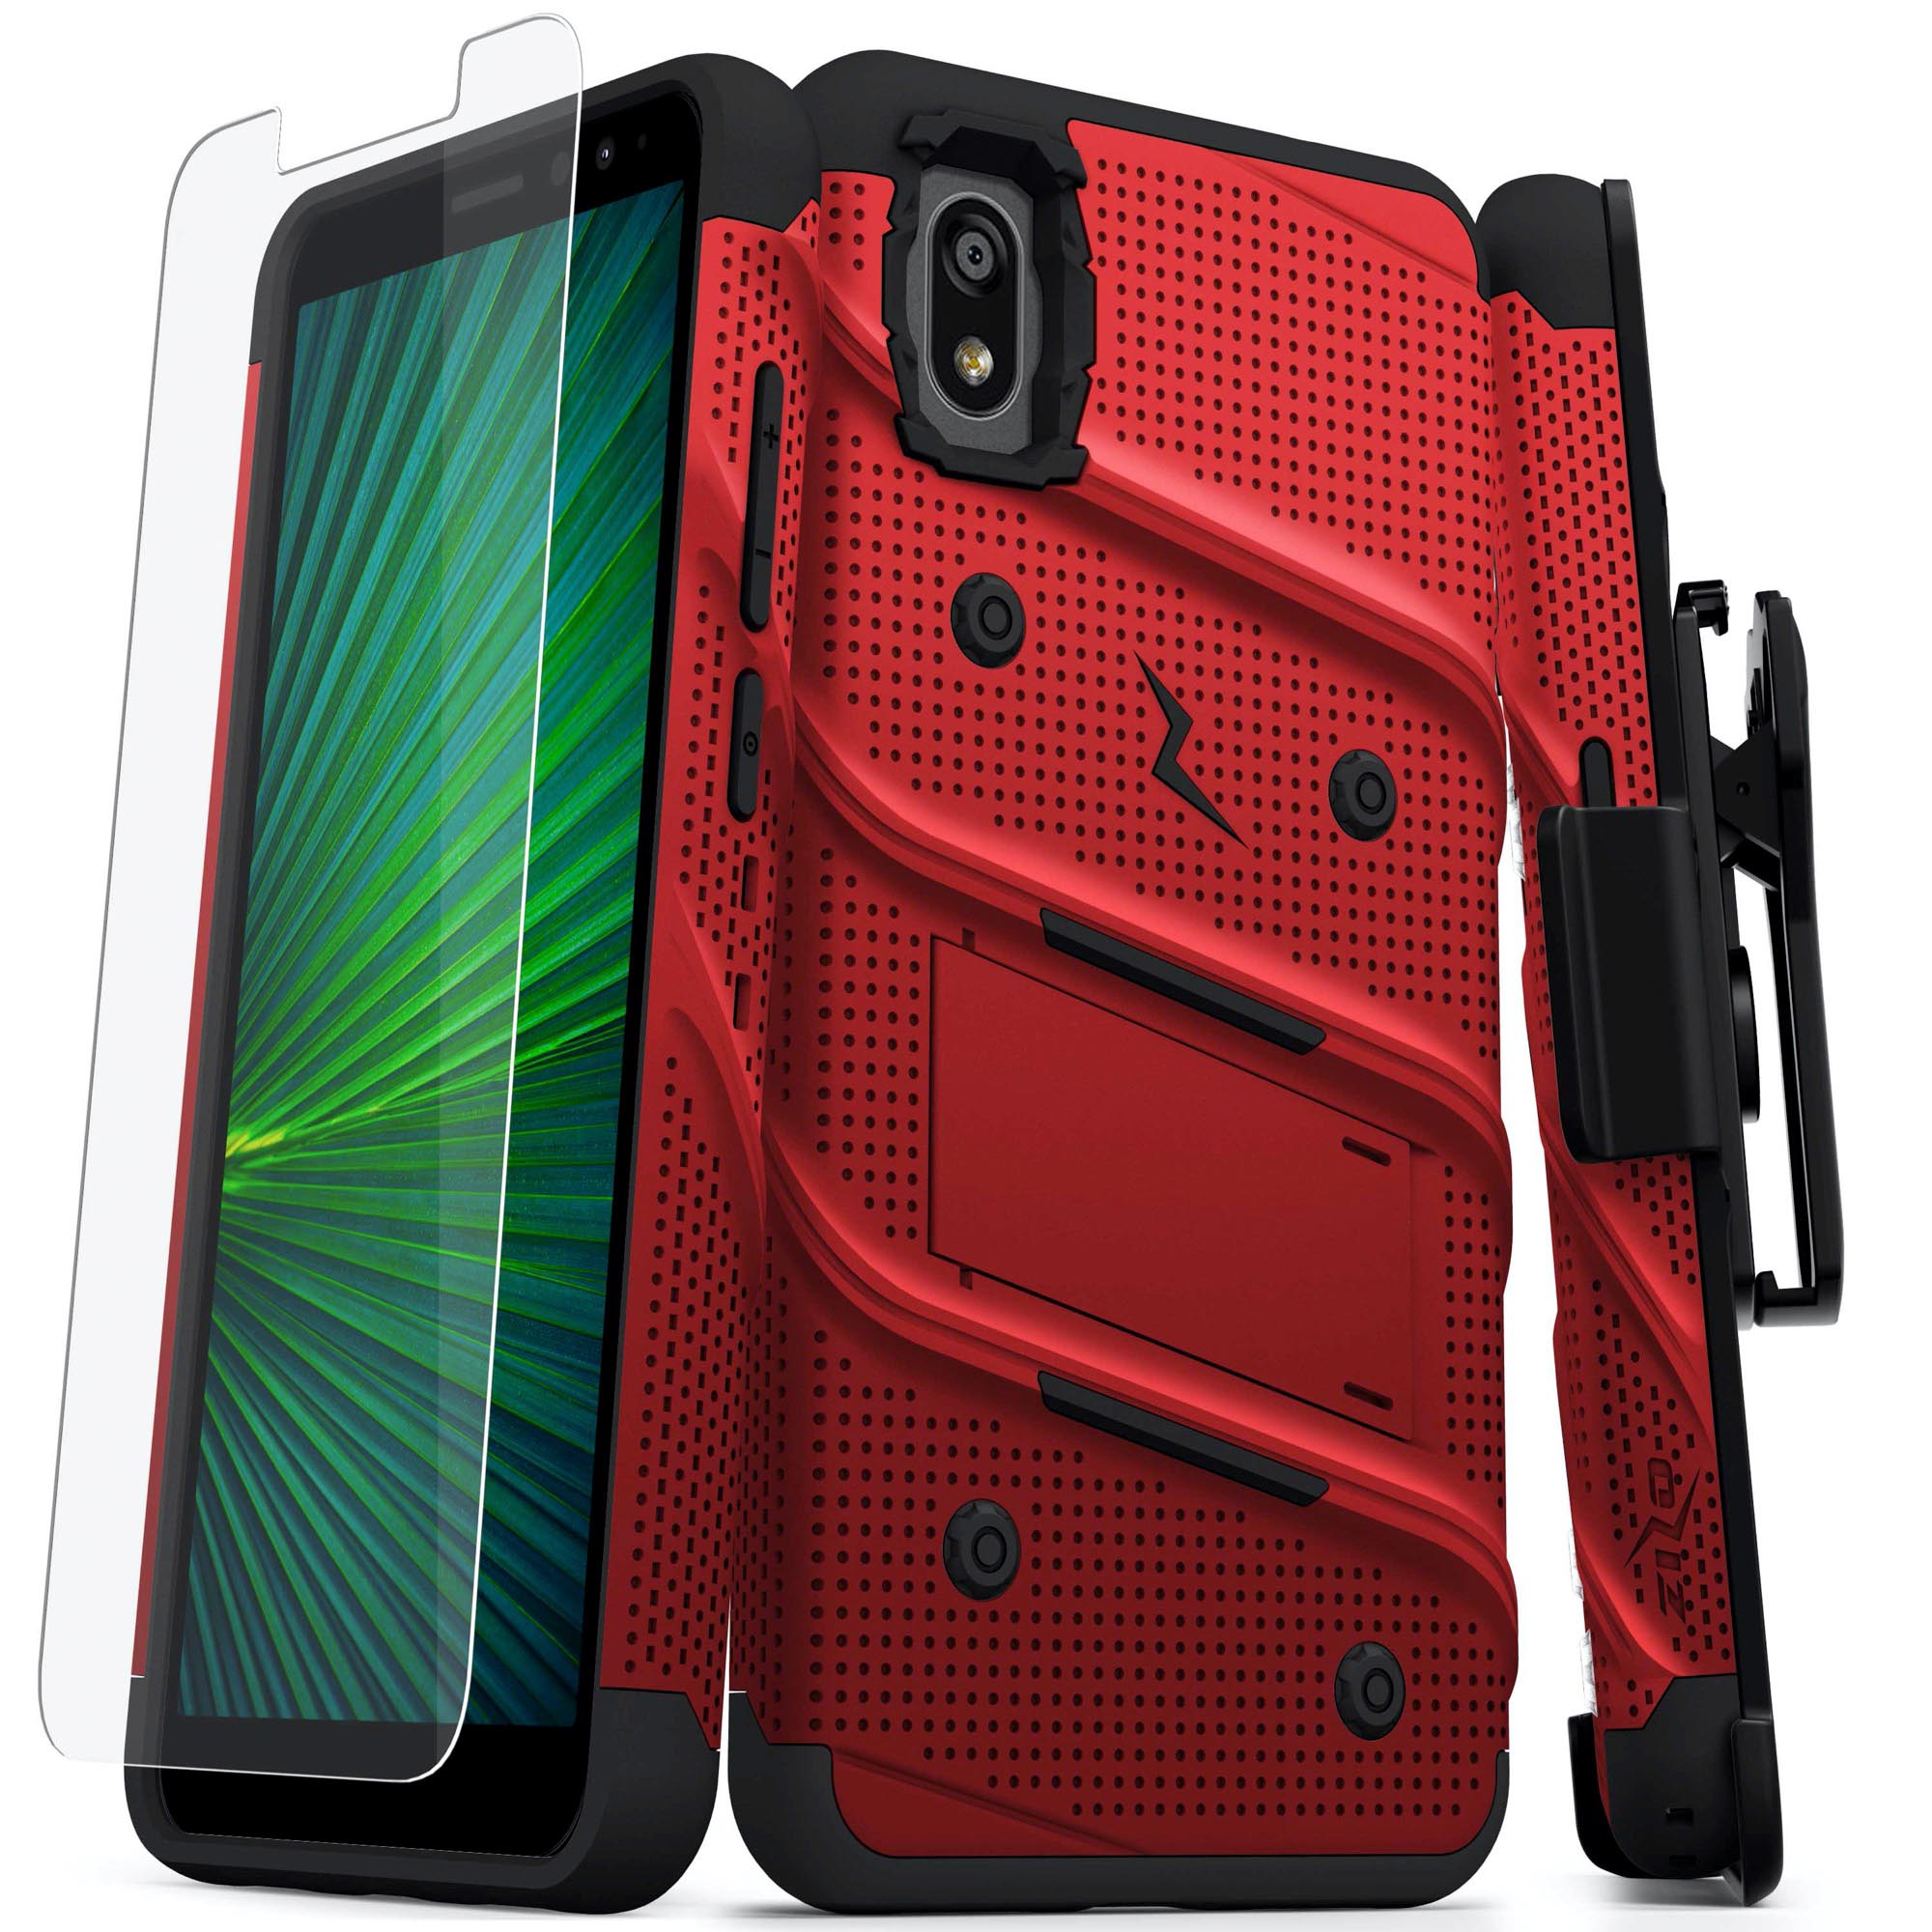 ALCATEL APPRISE ZIZO BOLT SERIES CASE WITH TEMPERED GLASS - RED & BLACK (11010)